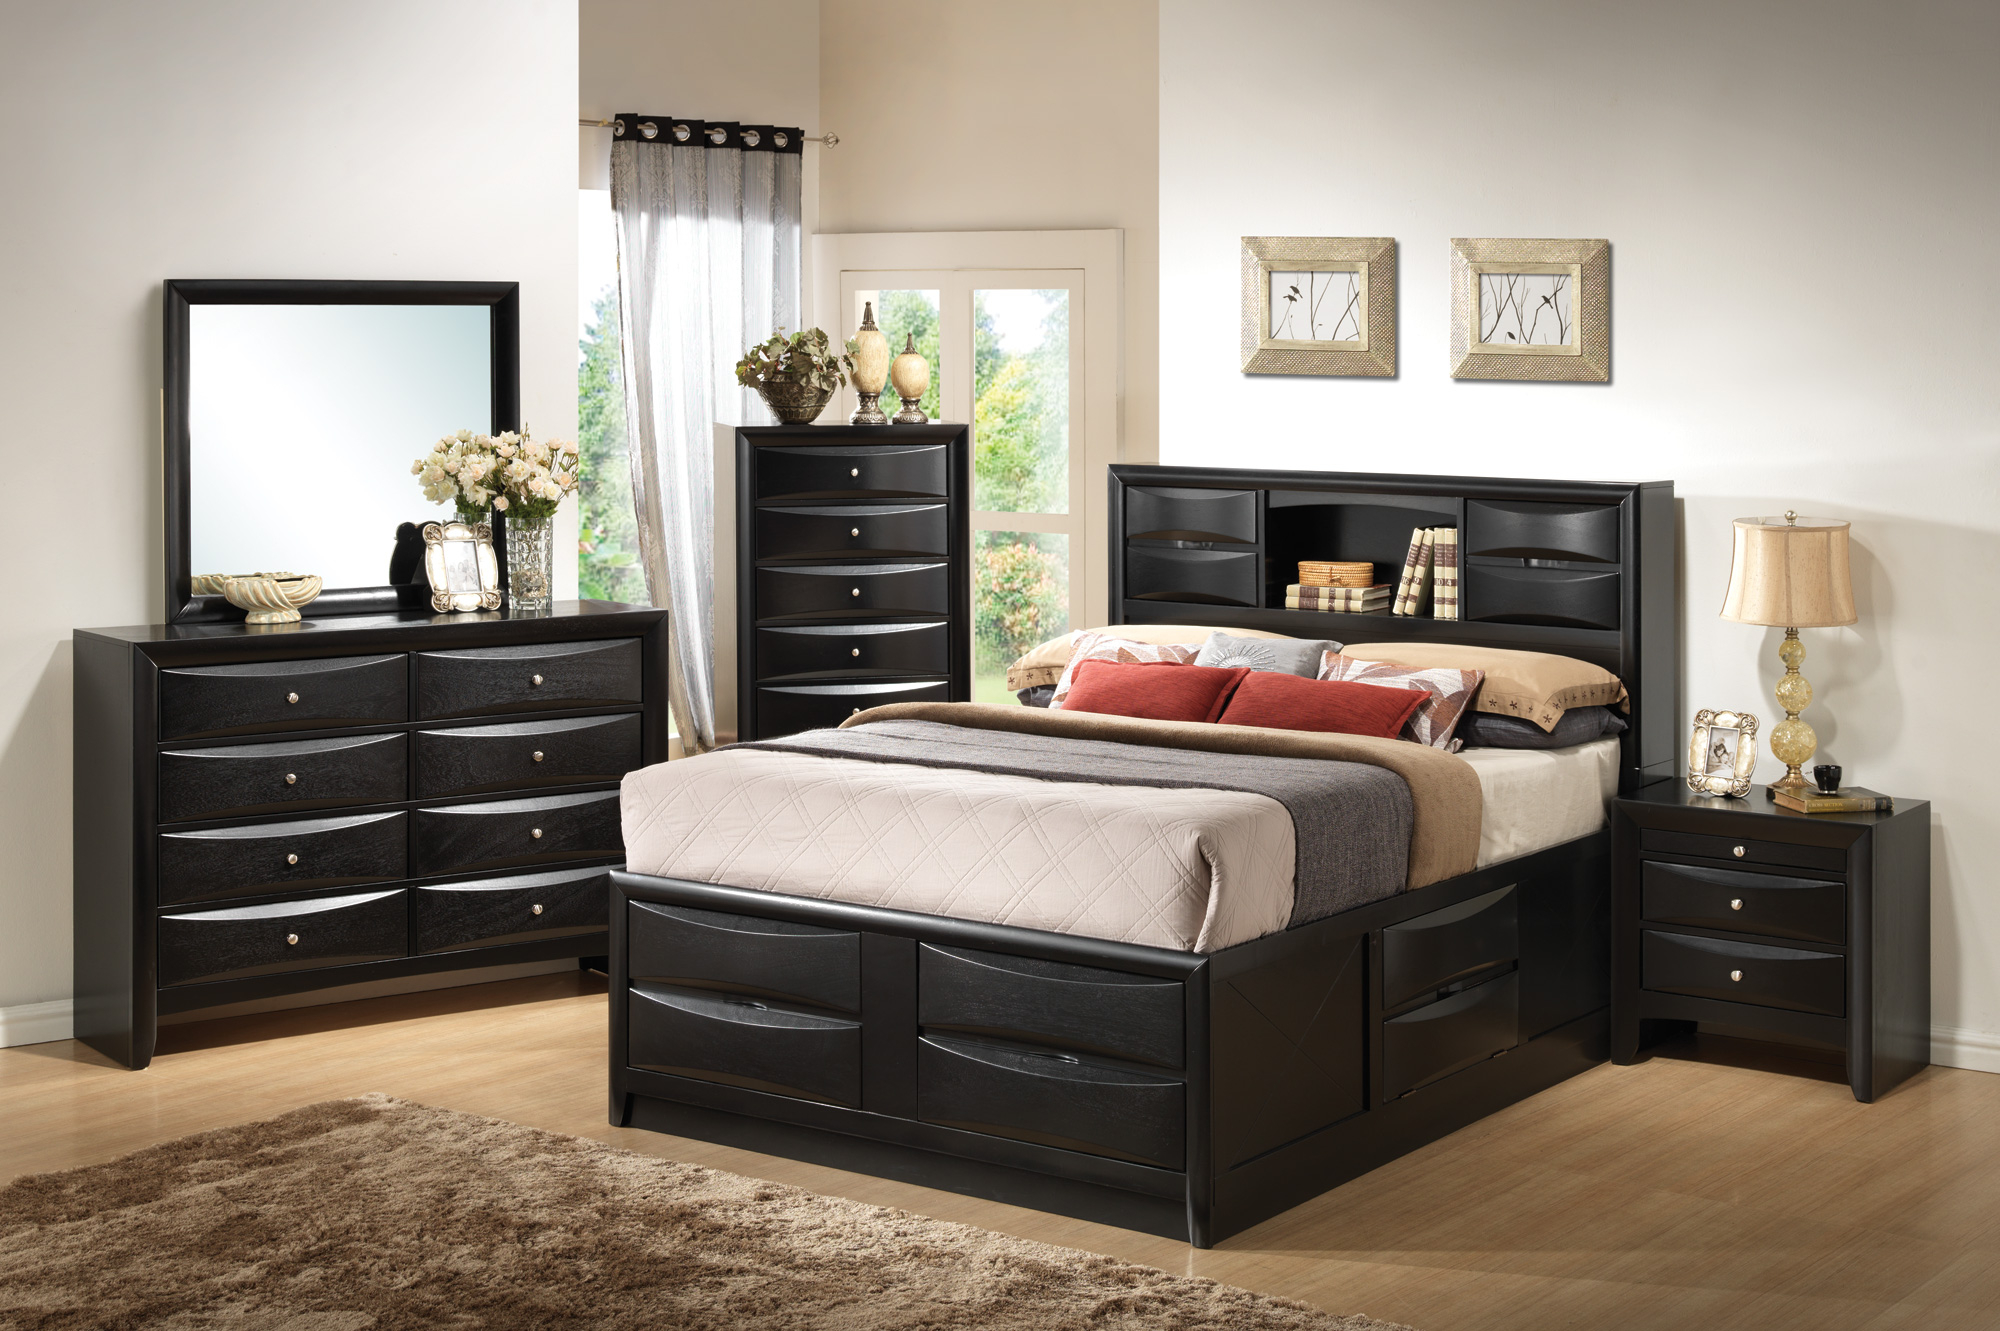 Coaster Briana Queen 5pc Storage Bedroom Set throughout proportions 2000 X 1331